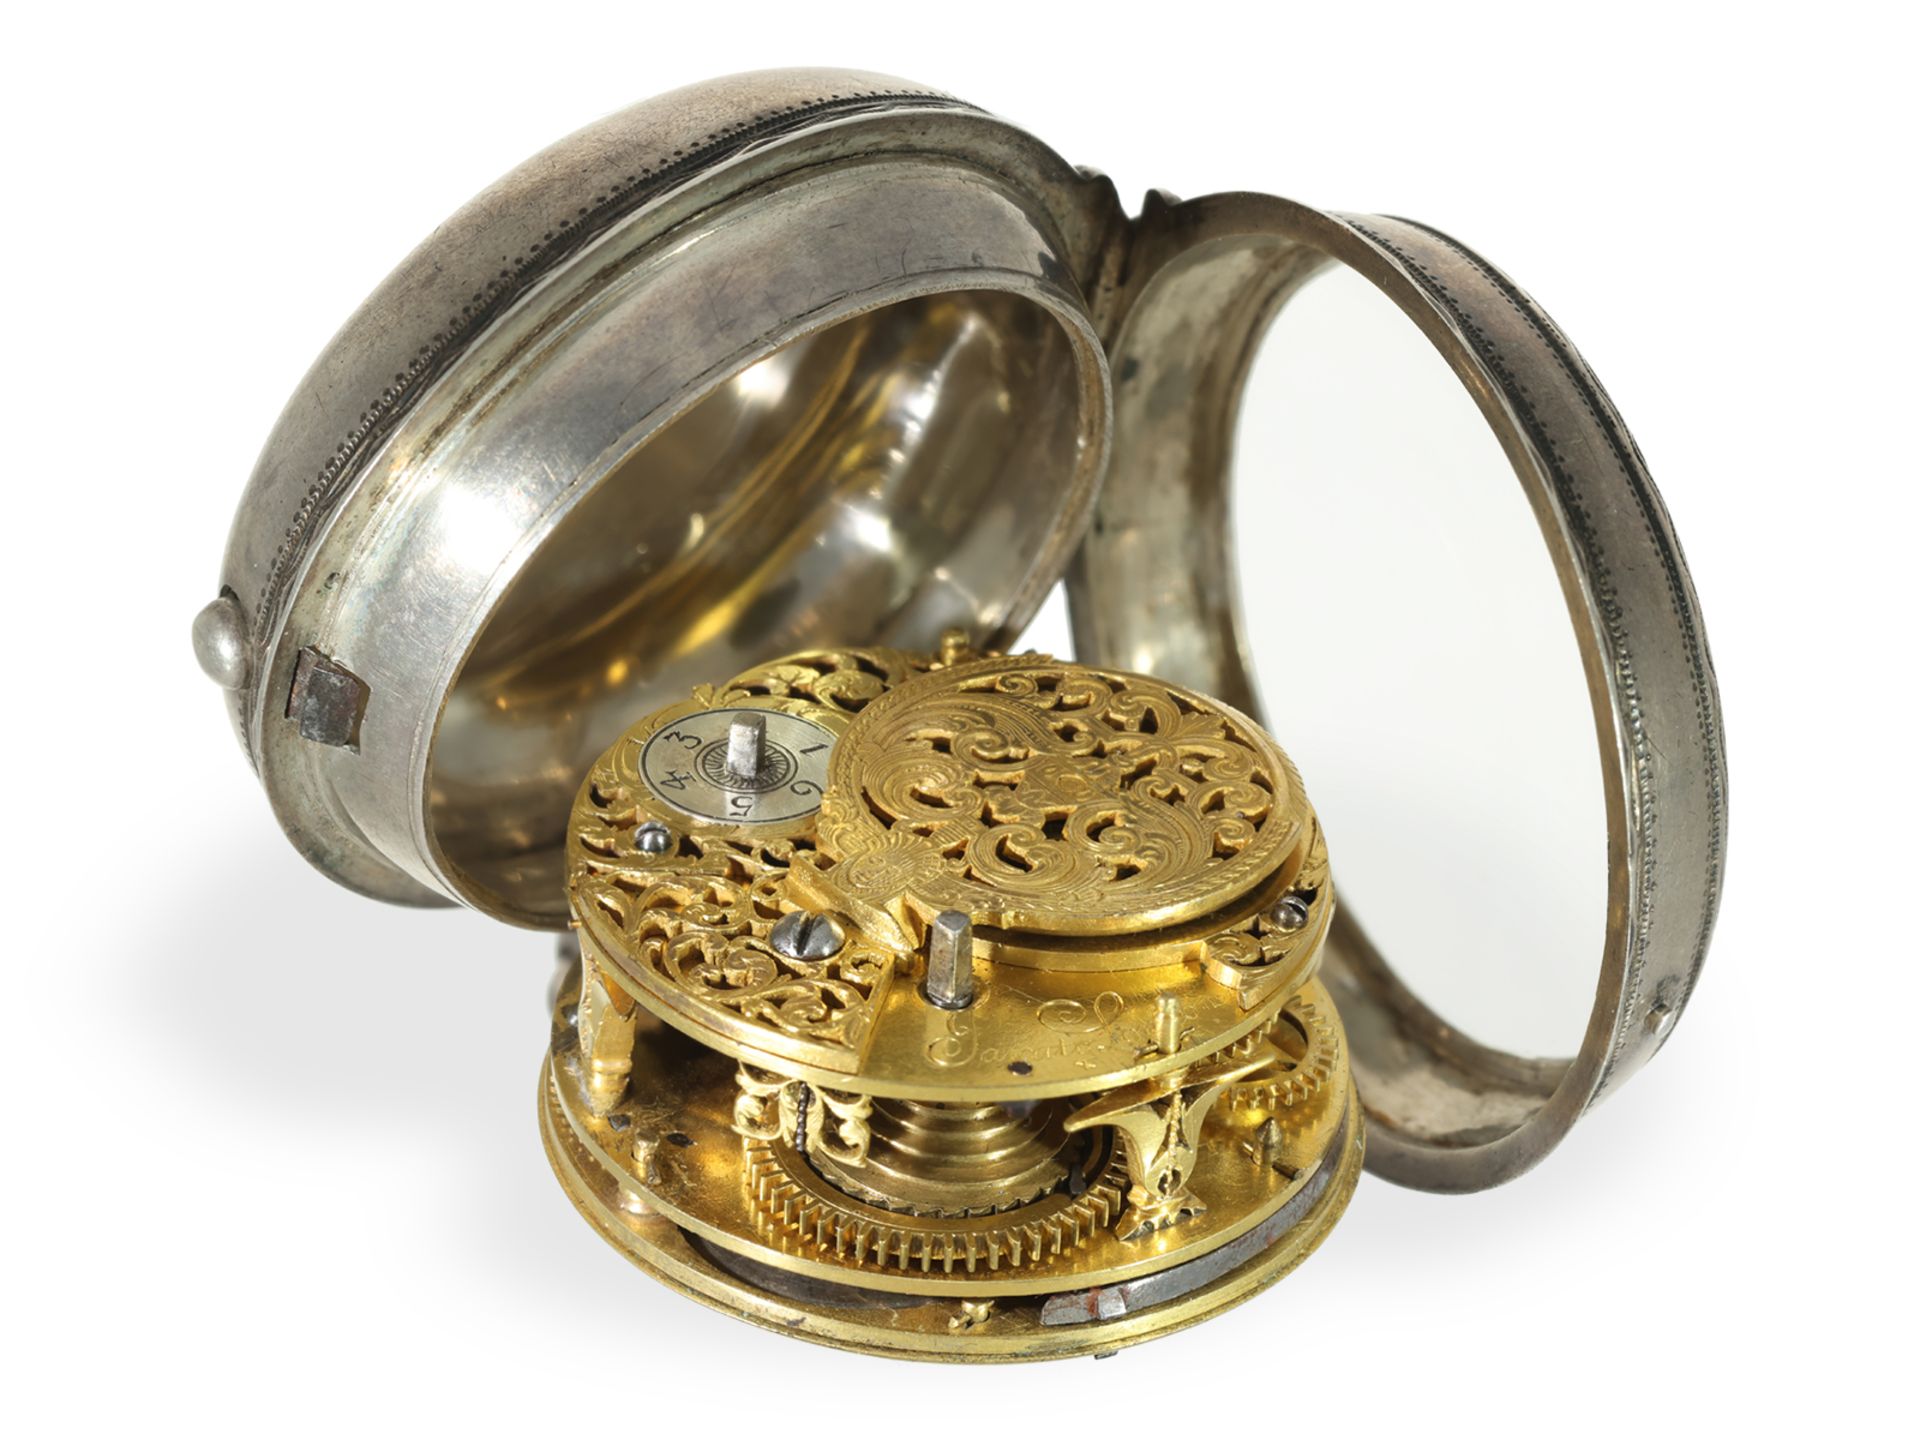 Pocket watch: museum astronomical verge watch with 6 complications, R. Jarrett London around 1690 - Image 4 of 5